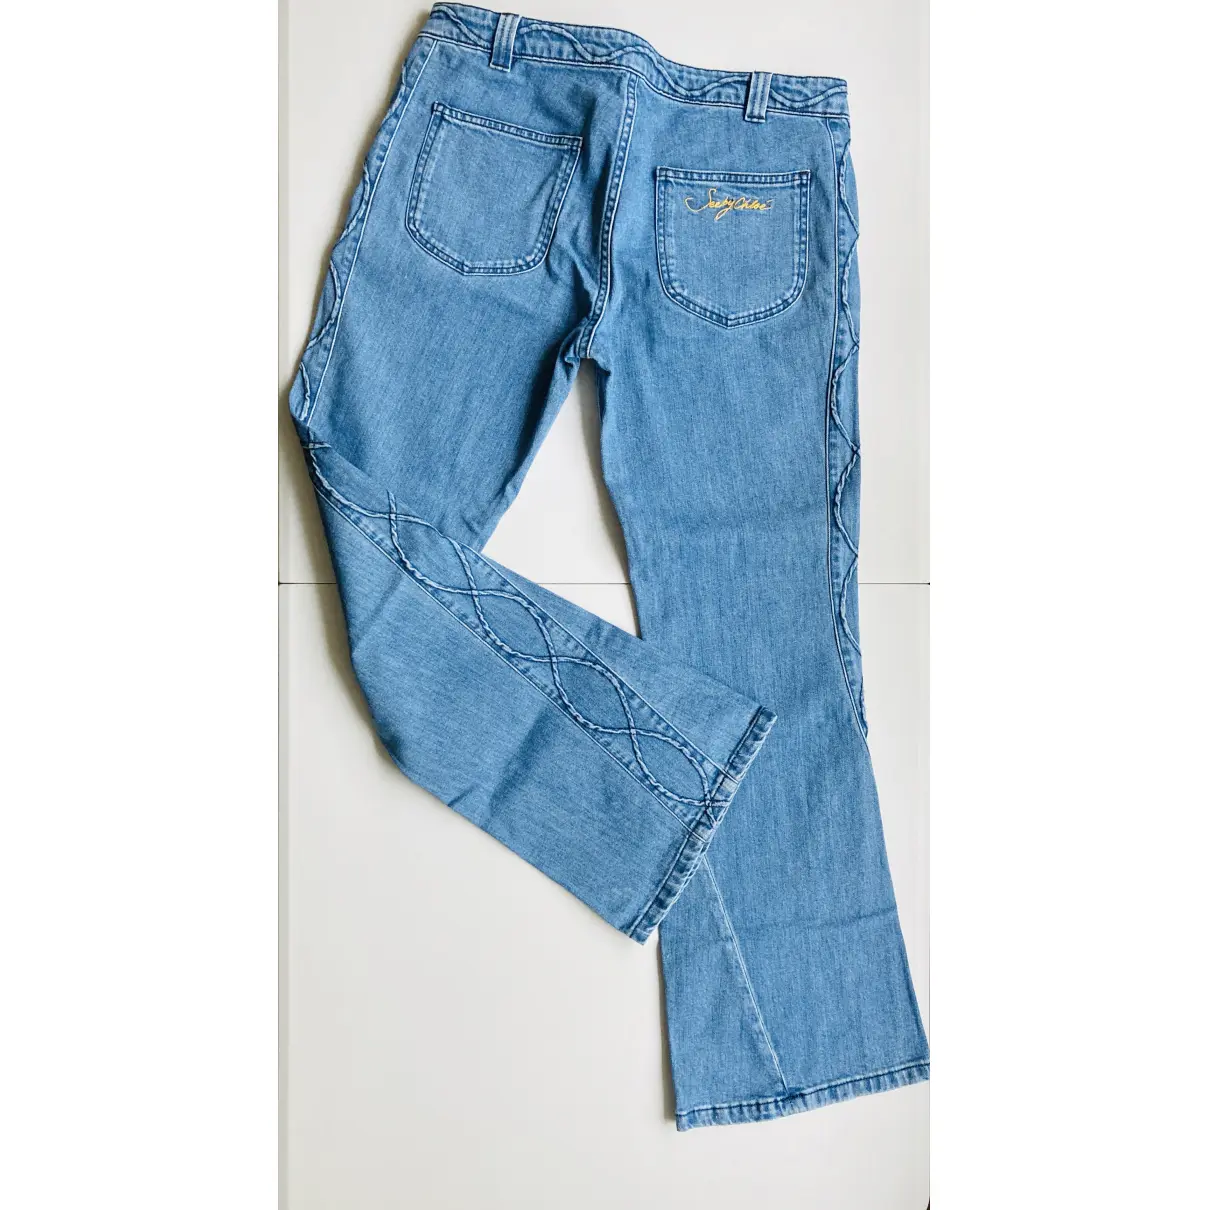 Buy See by Chloé Blue Cotton Jeans online